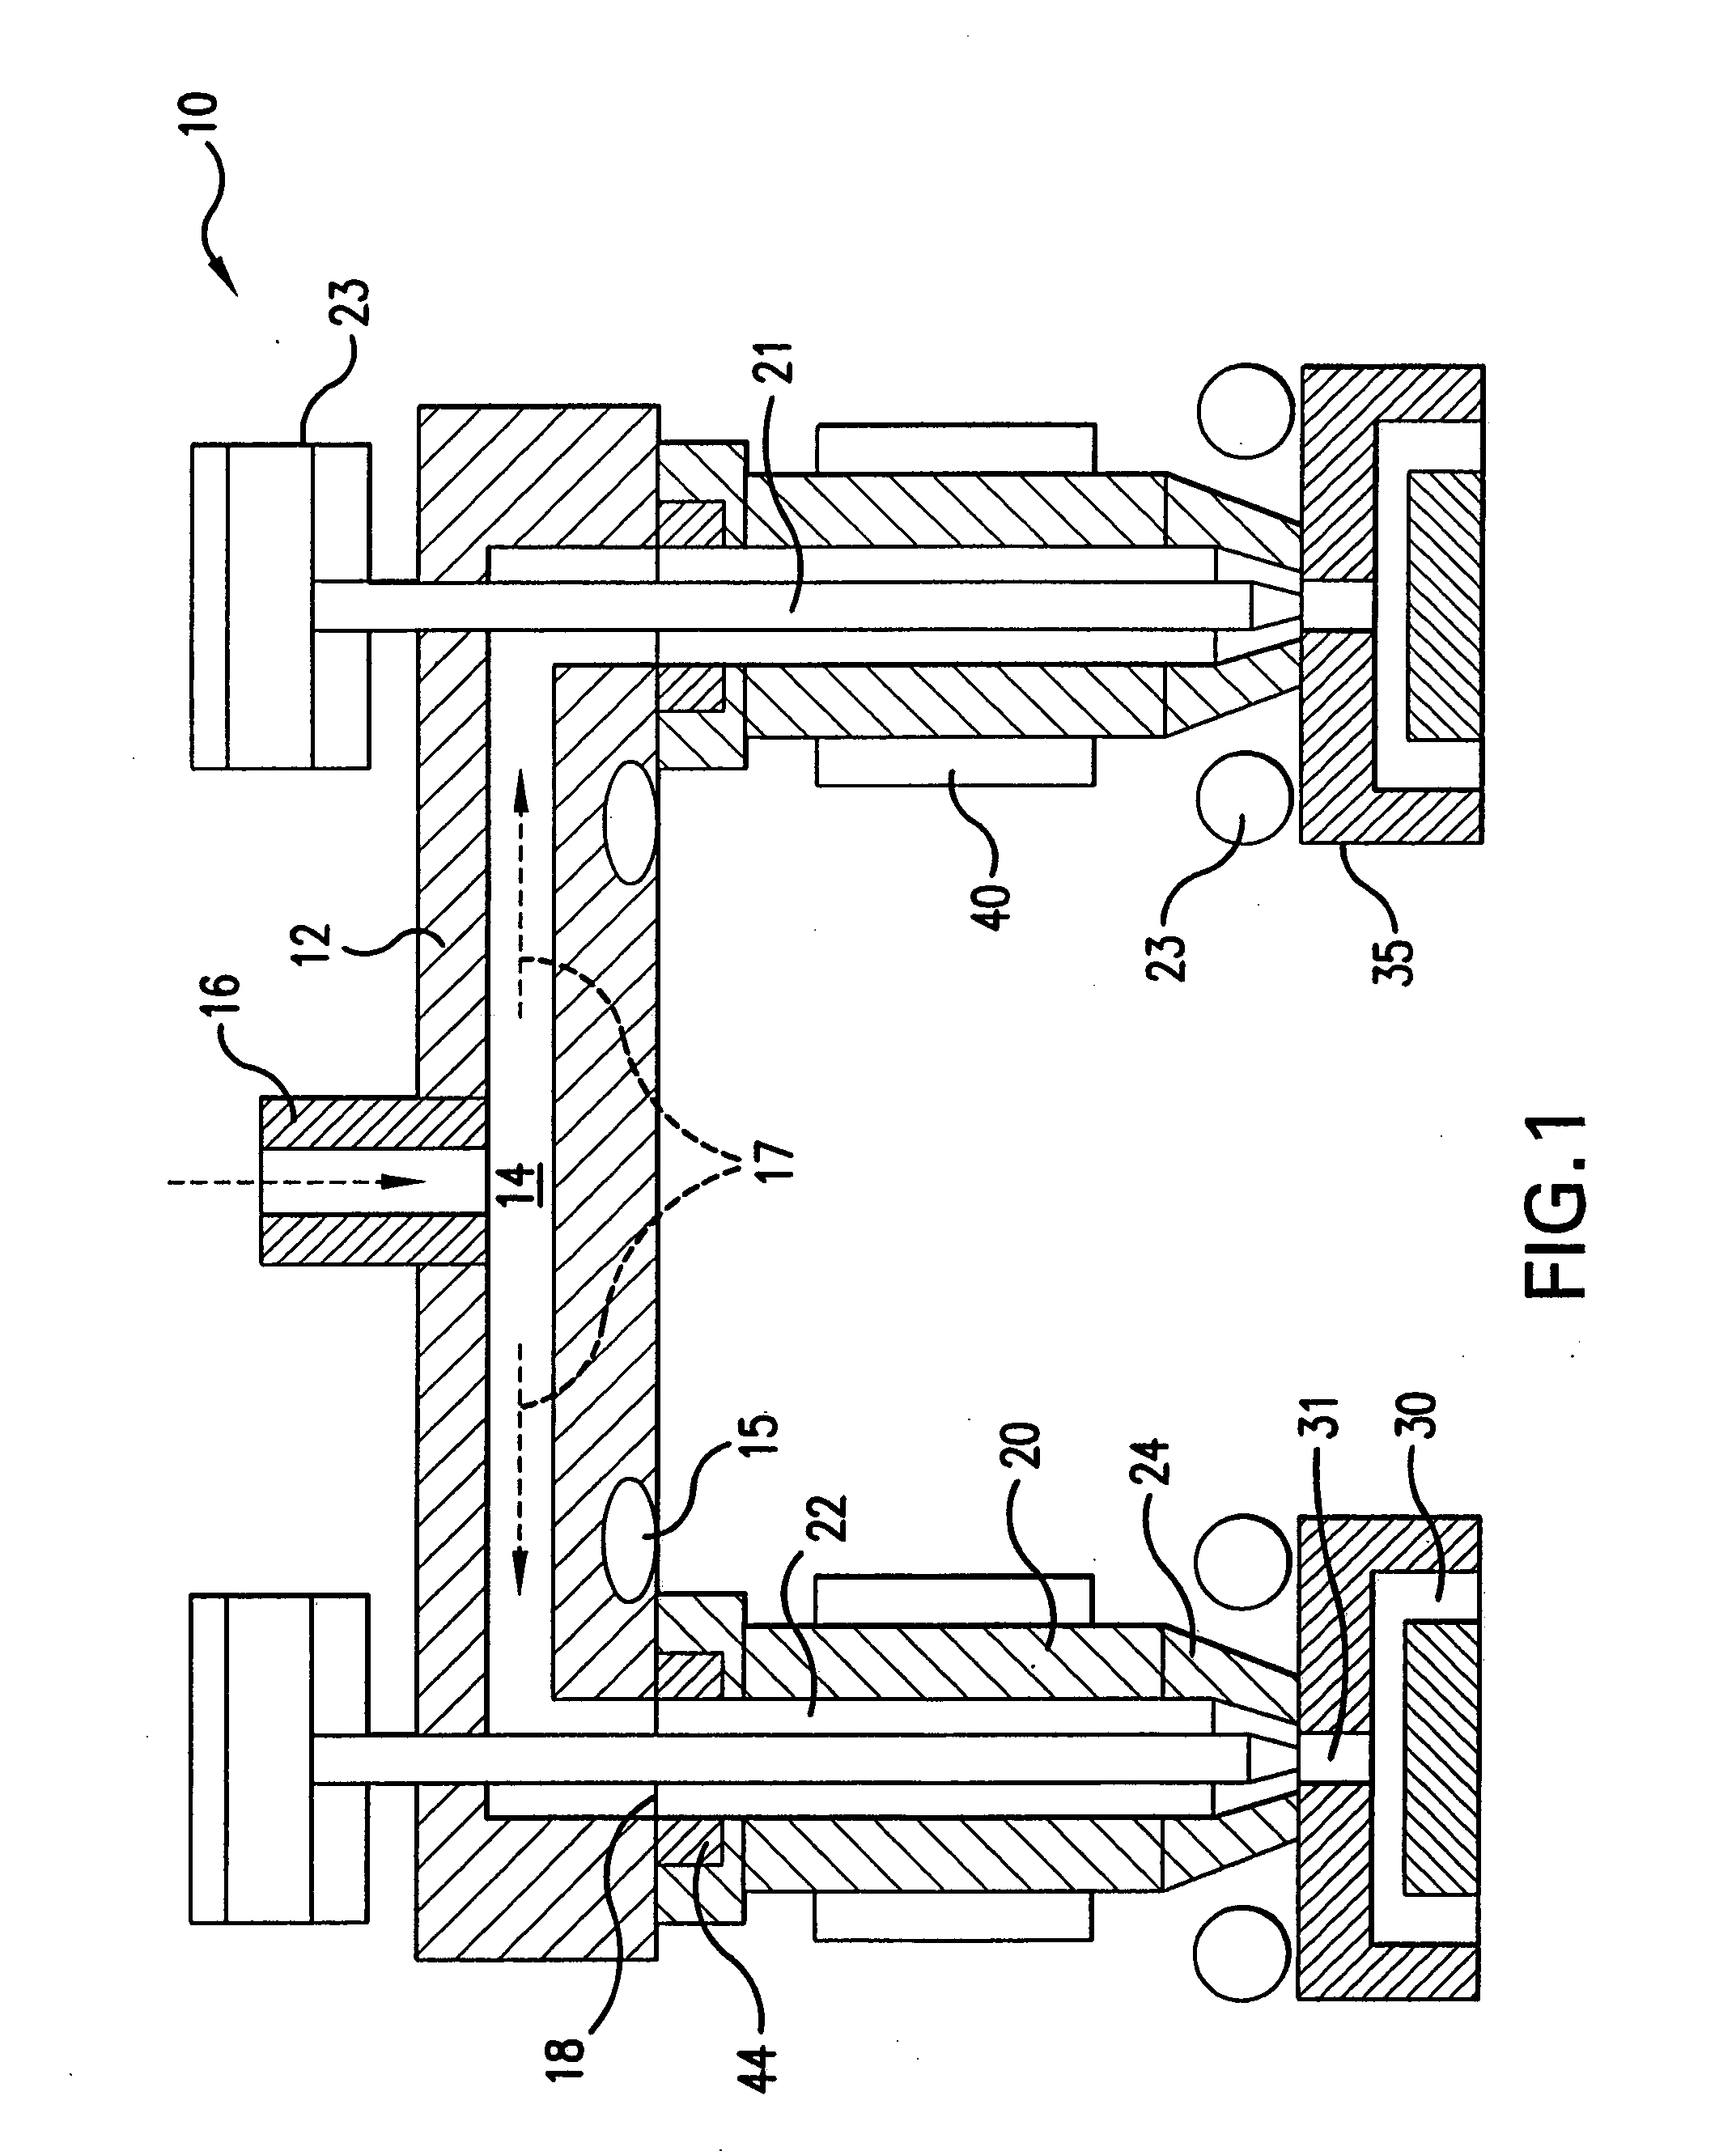 Thermal seal between manifold and nozzle